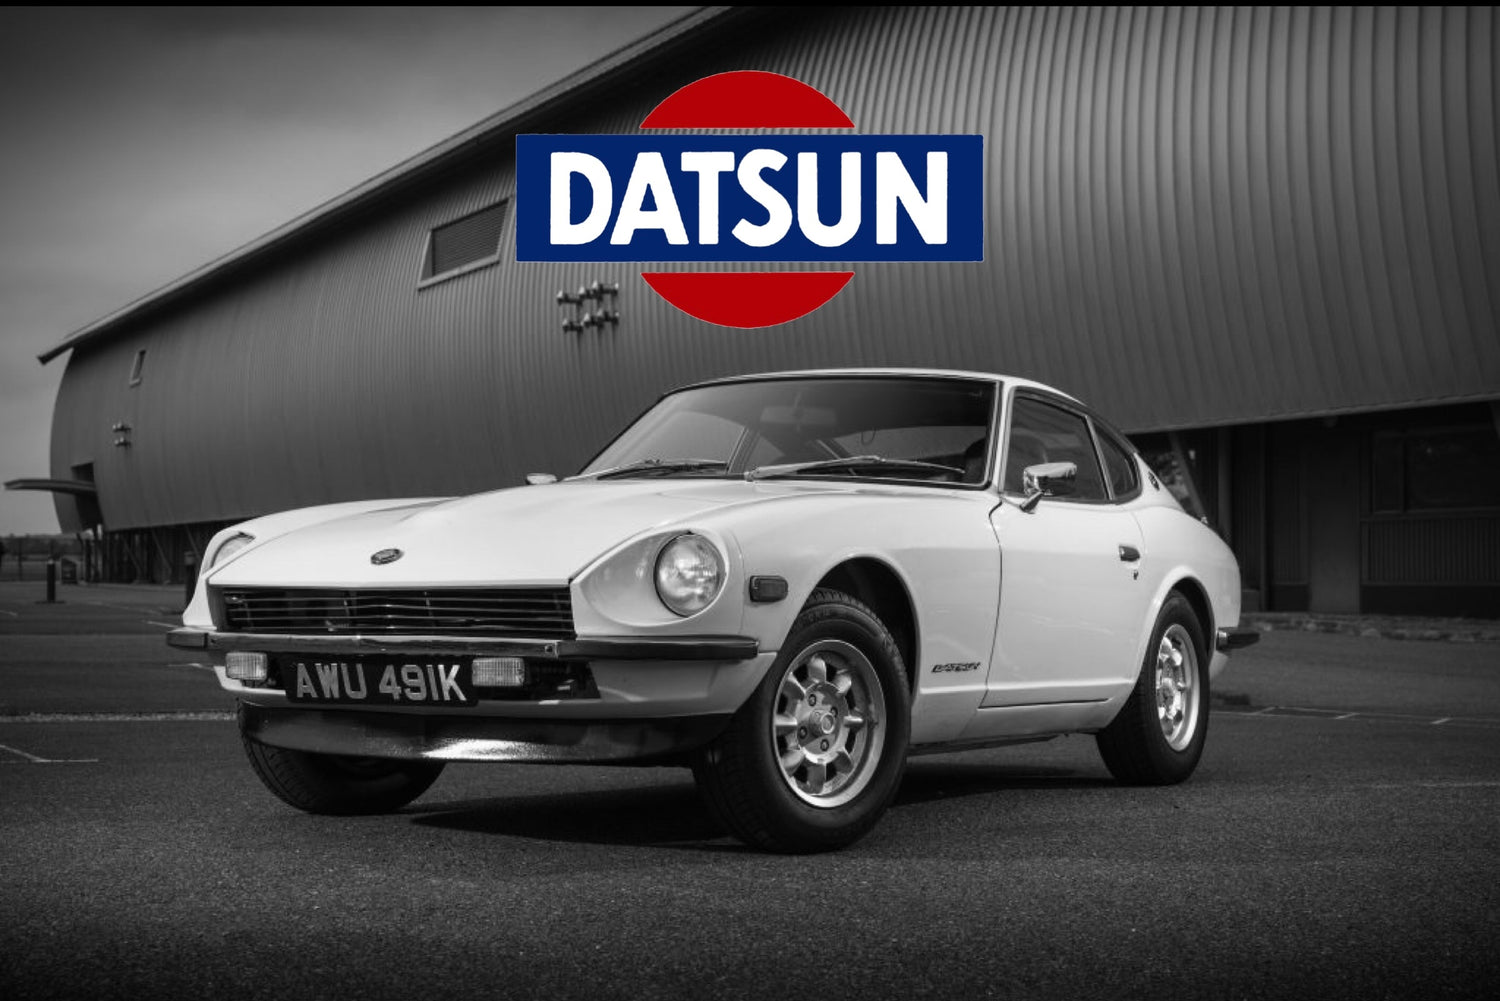 Datsun 240z in black and white with datsun logo above